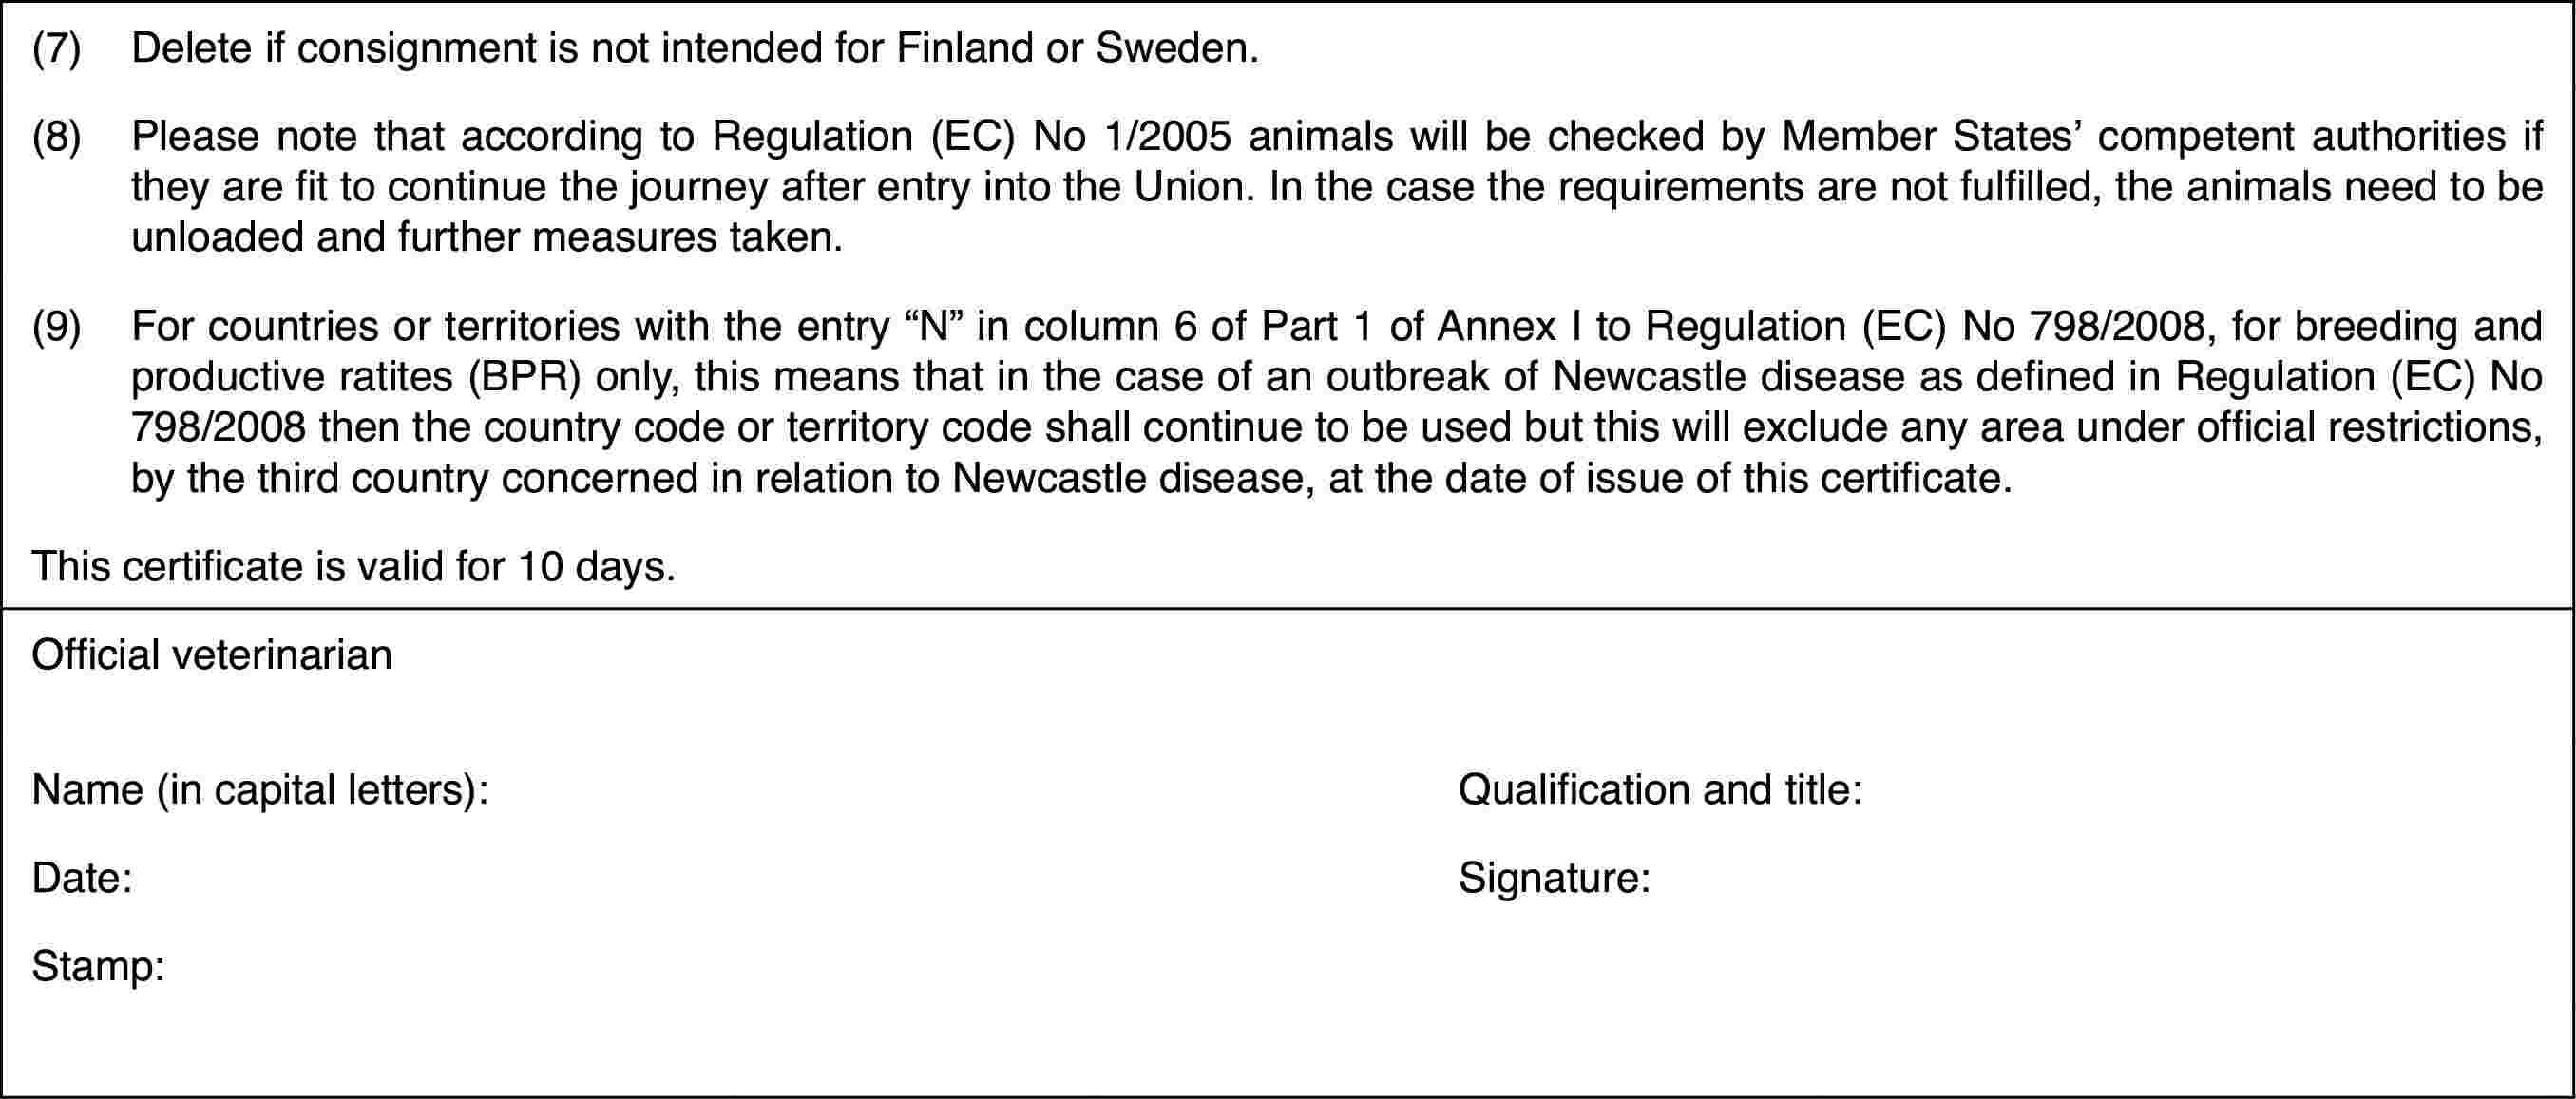 (7)Delete if consignment isnot intended for Finland or Sweden.(8)Please note that according to Regulation (EC) No 1/2005 animals willbe checked by Member States’ competent authorities if they are fit to continuethe journey after entry into the Union. In the case the requirements are notfulfilled, the animals need to be unloaded and further measures taken.(9)For countries or territories with the entry “N” in column 6 of Part1 of Annex I to Regulation (EC) No 798/2008, for breeding and productive ratites(BPR) only, this means that in the case of an outbreak of Newcastle diseaseas defined in Regulation (EC) No 798/2008 then the country code or territorycode shall continue to be used but this will exclude any area under officialrestrictions, by the third country concerned in relation to Newcastle disease,at the date of issue of this certificate.This certificateis valid for 10 days.Official veterinarianName (in capitalletters):Qualification and title:Date:Signature:Stamp: